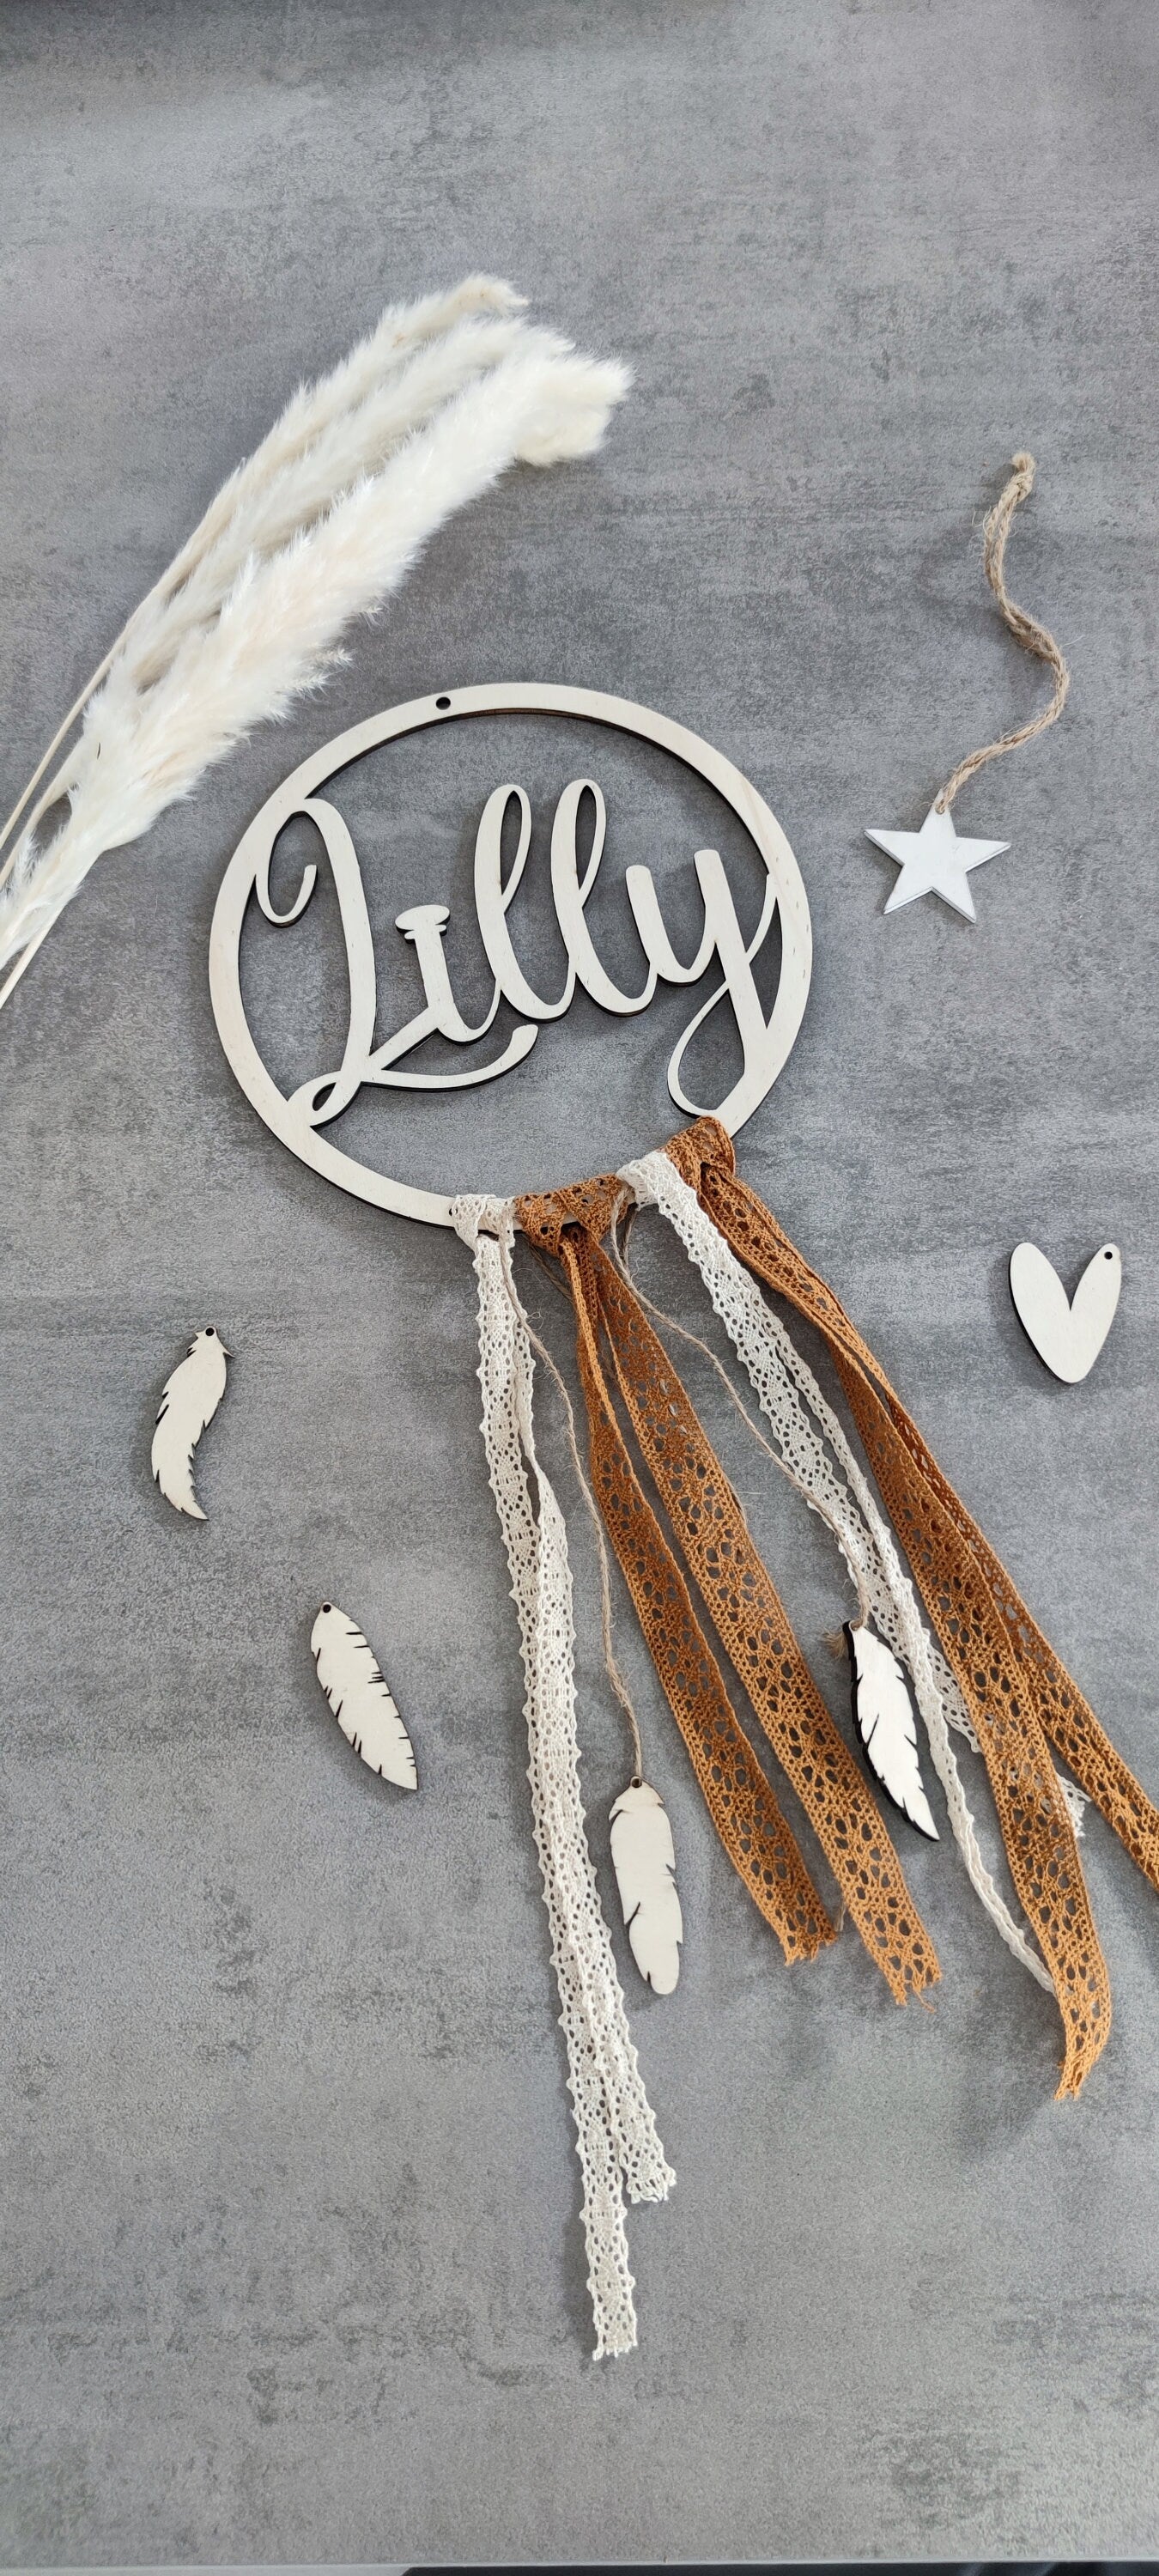 Personalized Boho dream catcher with name/Dream catcher personalized/Boho/Dream catcher with name/Wooden dream catcher/Dream catcher name